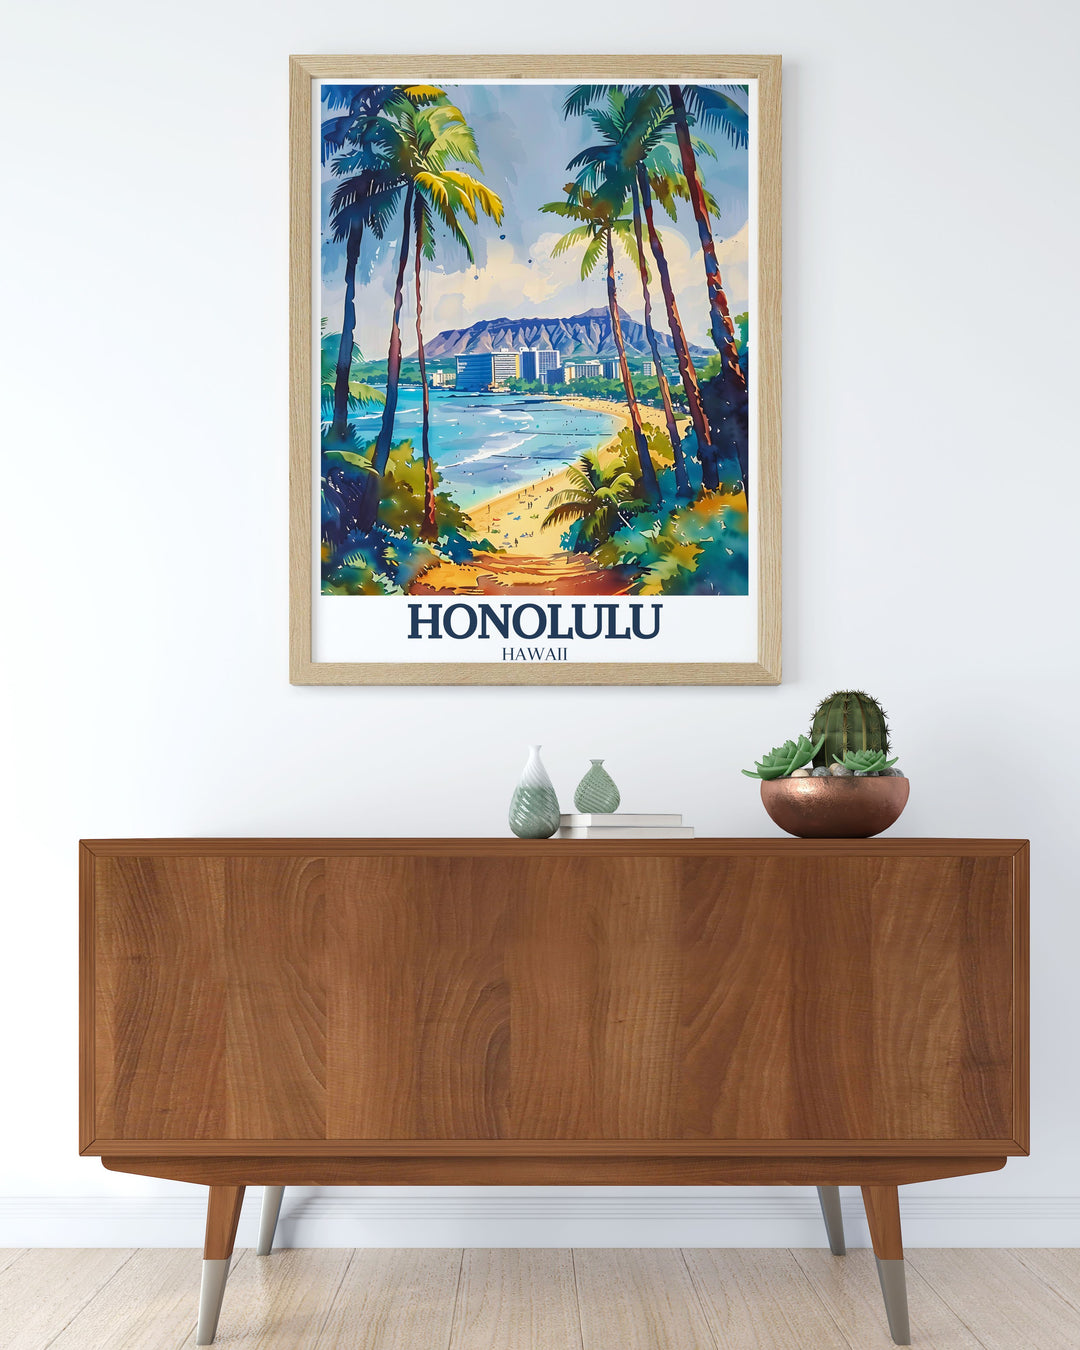 Gallery wall art of Diamond Head Crater in Honolulu, Hawaii, capturing the rugged beauty and expansive views of this iconic volcanic formation. This print offers a striking depiction of one of Hawaiis most renowned natural wonders.